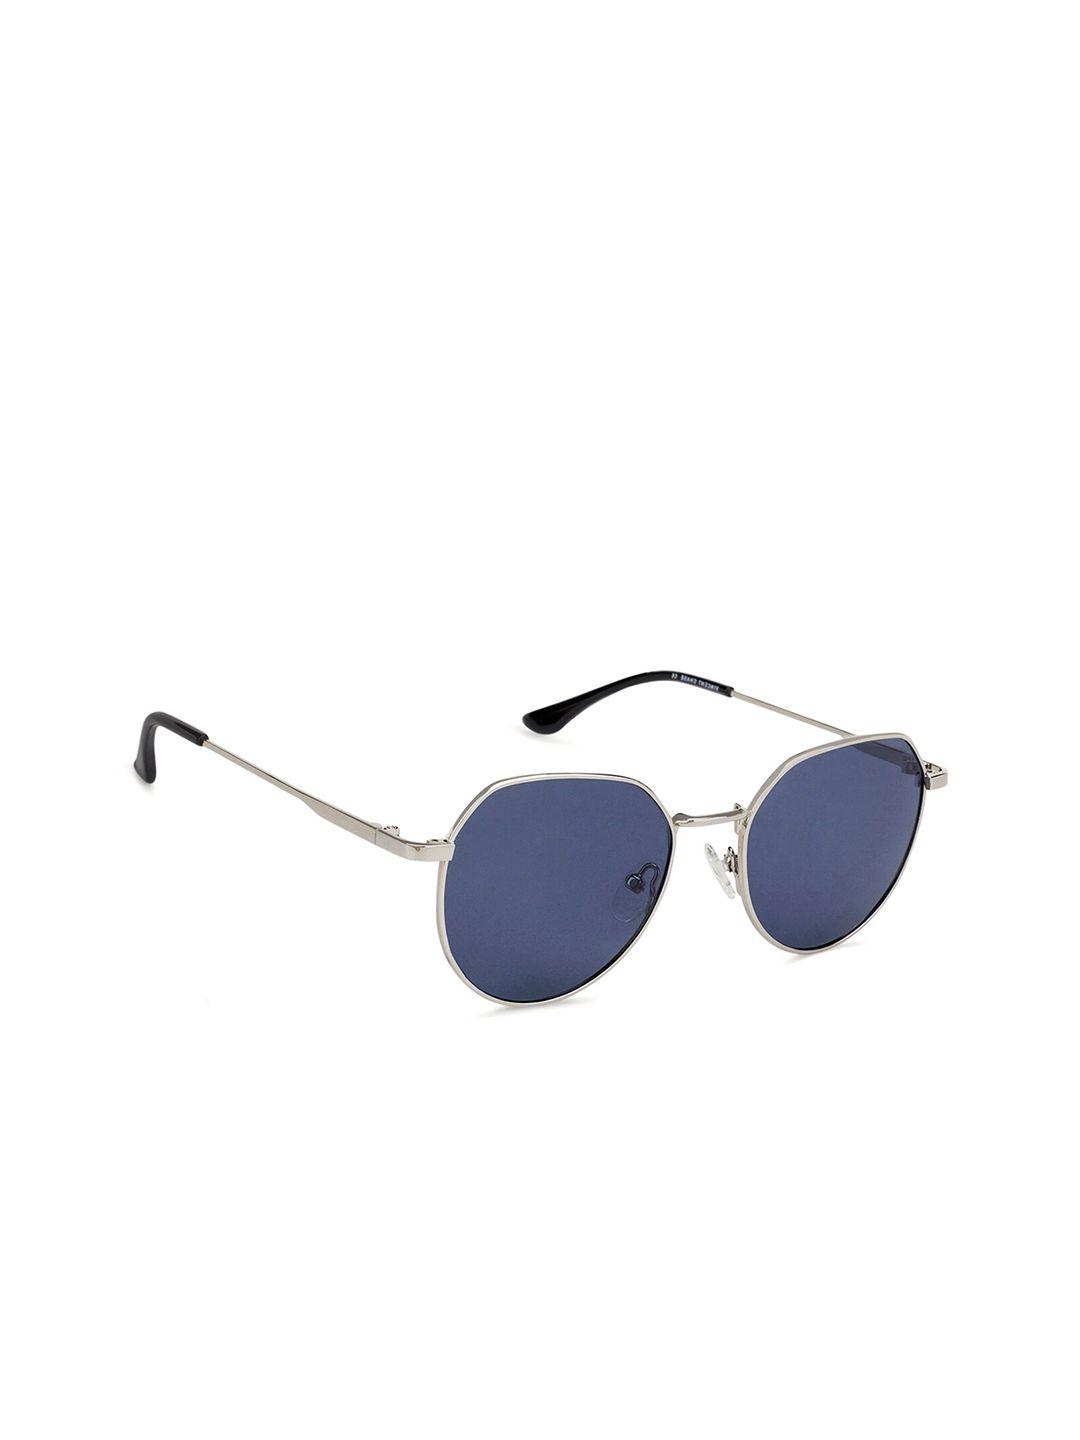 vincent chase unisex blue lens & silver-toned round sunglasses with polarised and uv protected lens